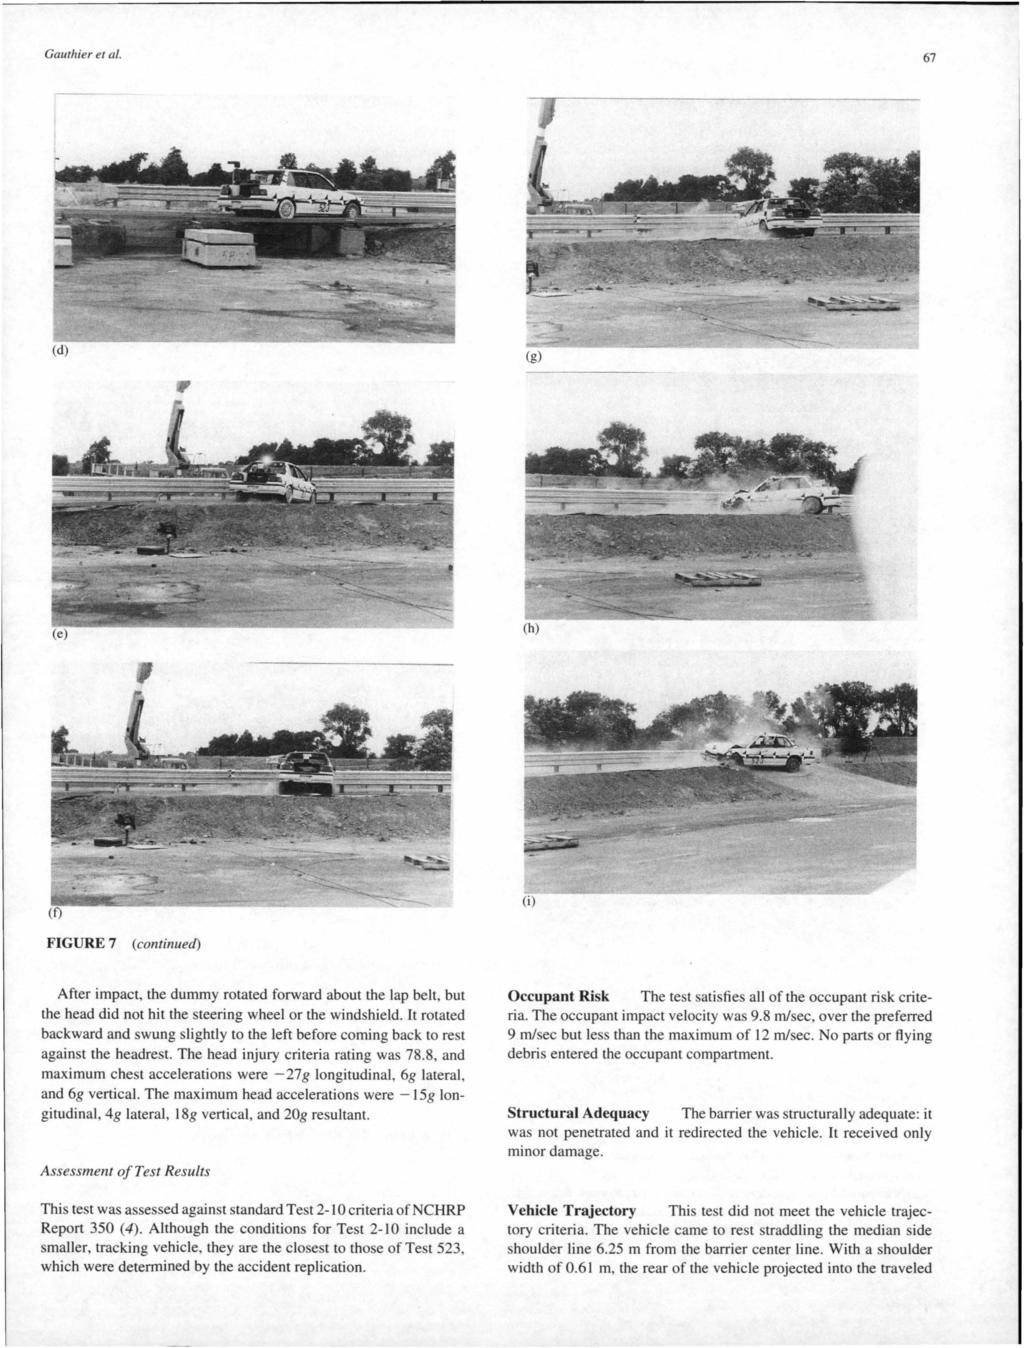 Gauthier et al. 67 (i) FIGURE 7 (continued) After impact, the dummy rotated forward about the lap belt, but the head did not hit the steering wheel or the windshield.